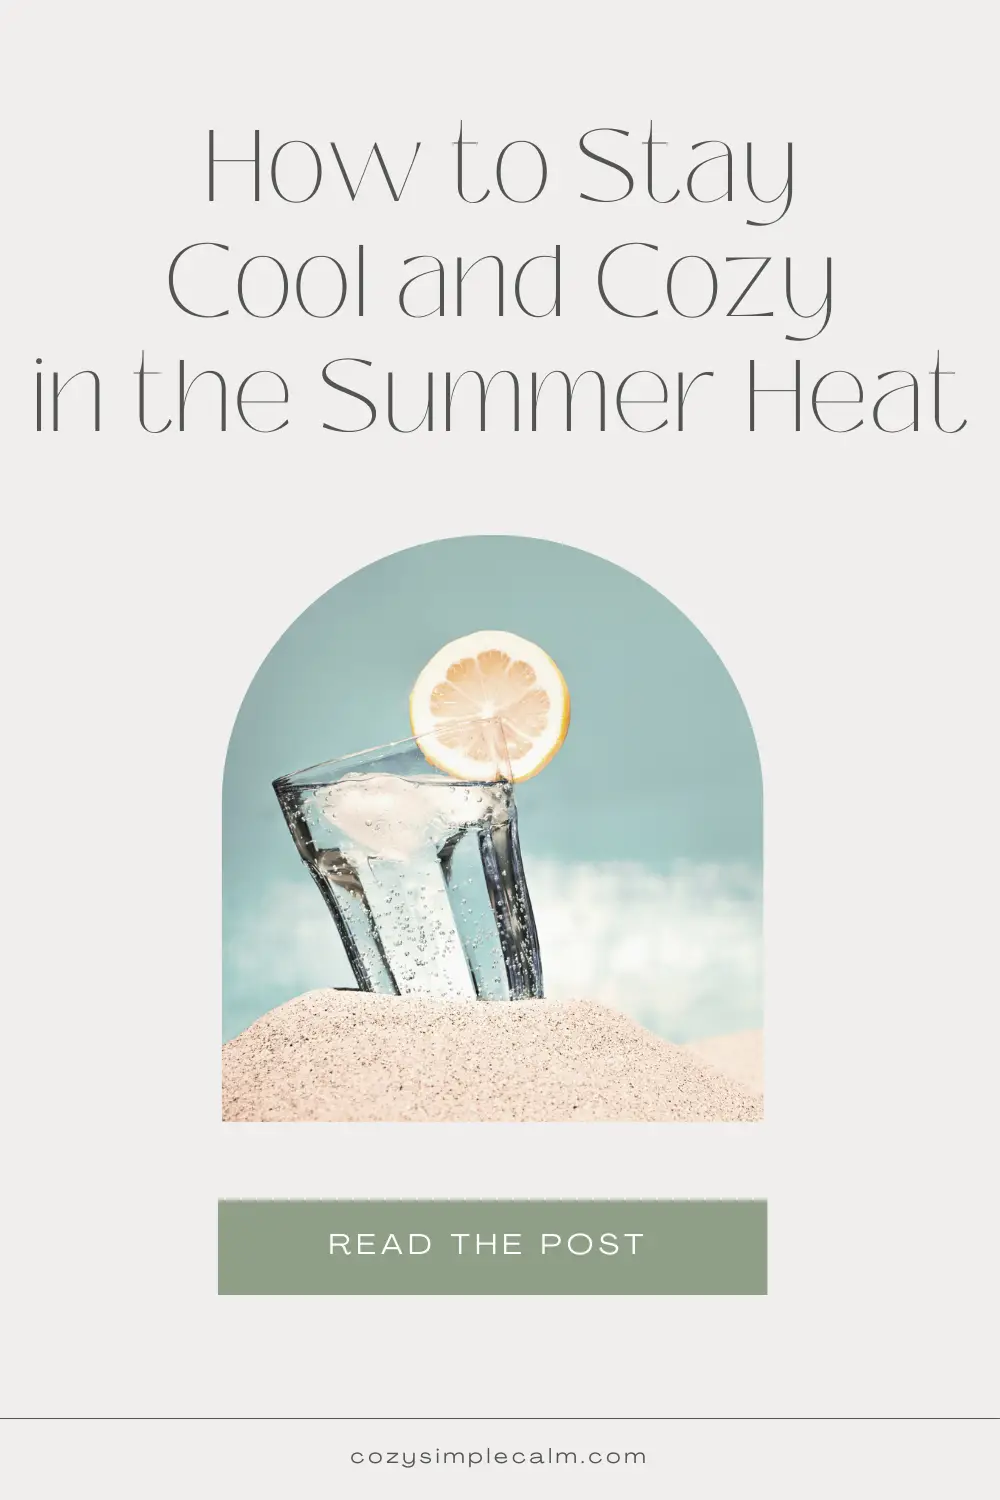 Image of glass with ice and an orange slice sitting in pile of sand - Text overlay: How to stay cool and cozy in the summer heat - cozysimplecalm.com